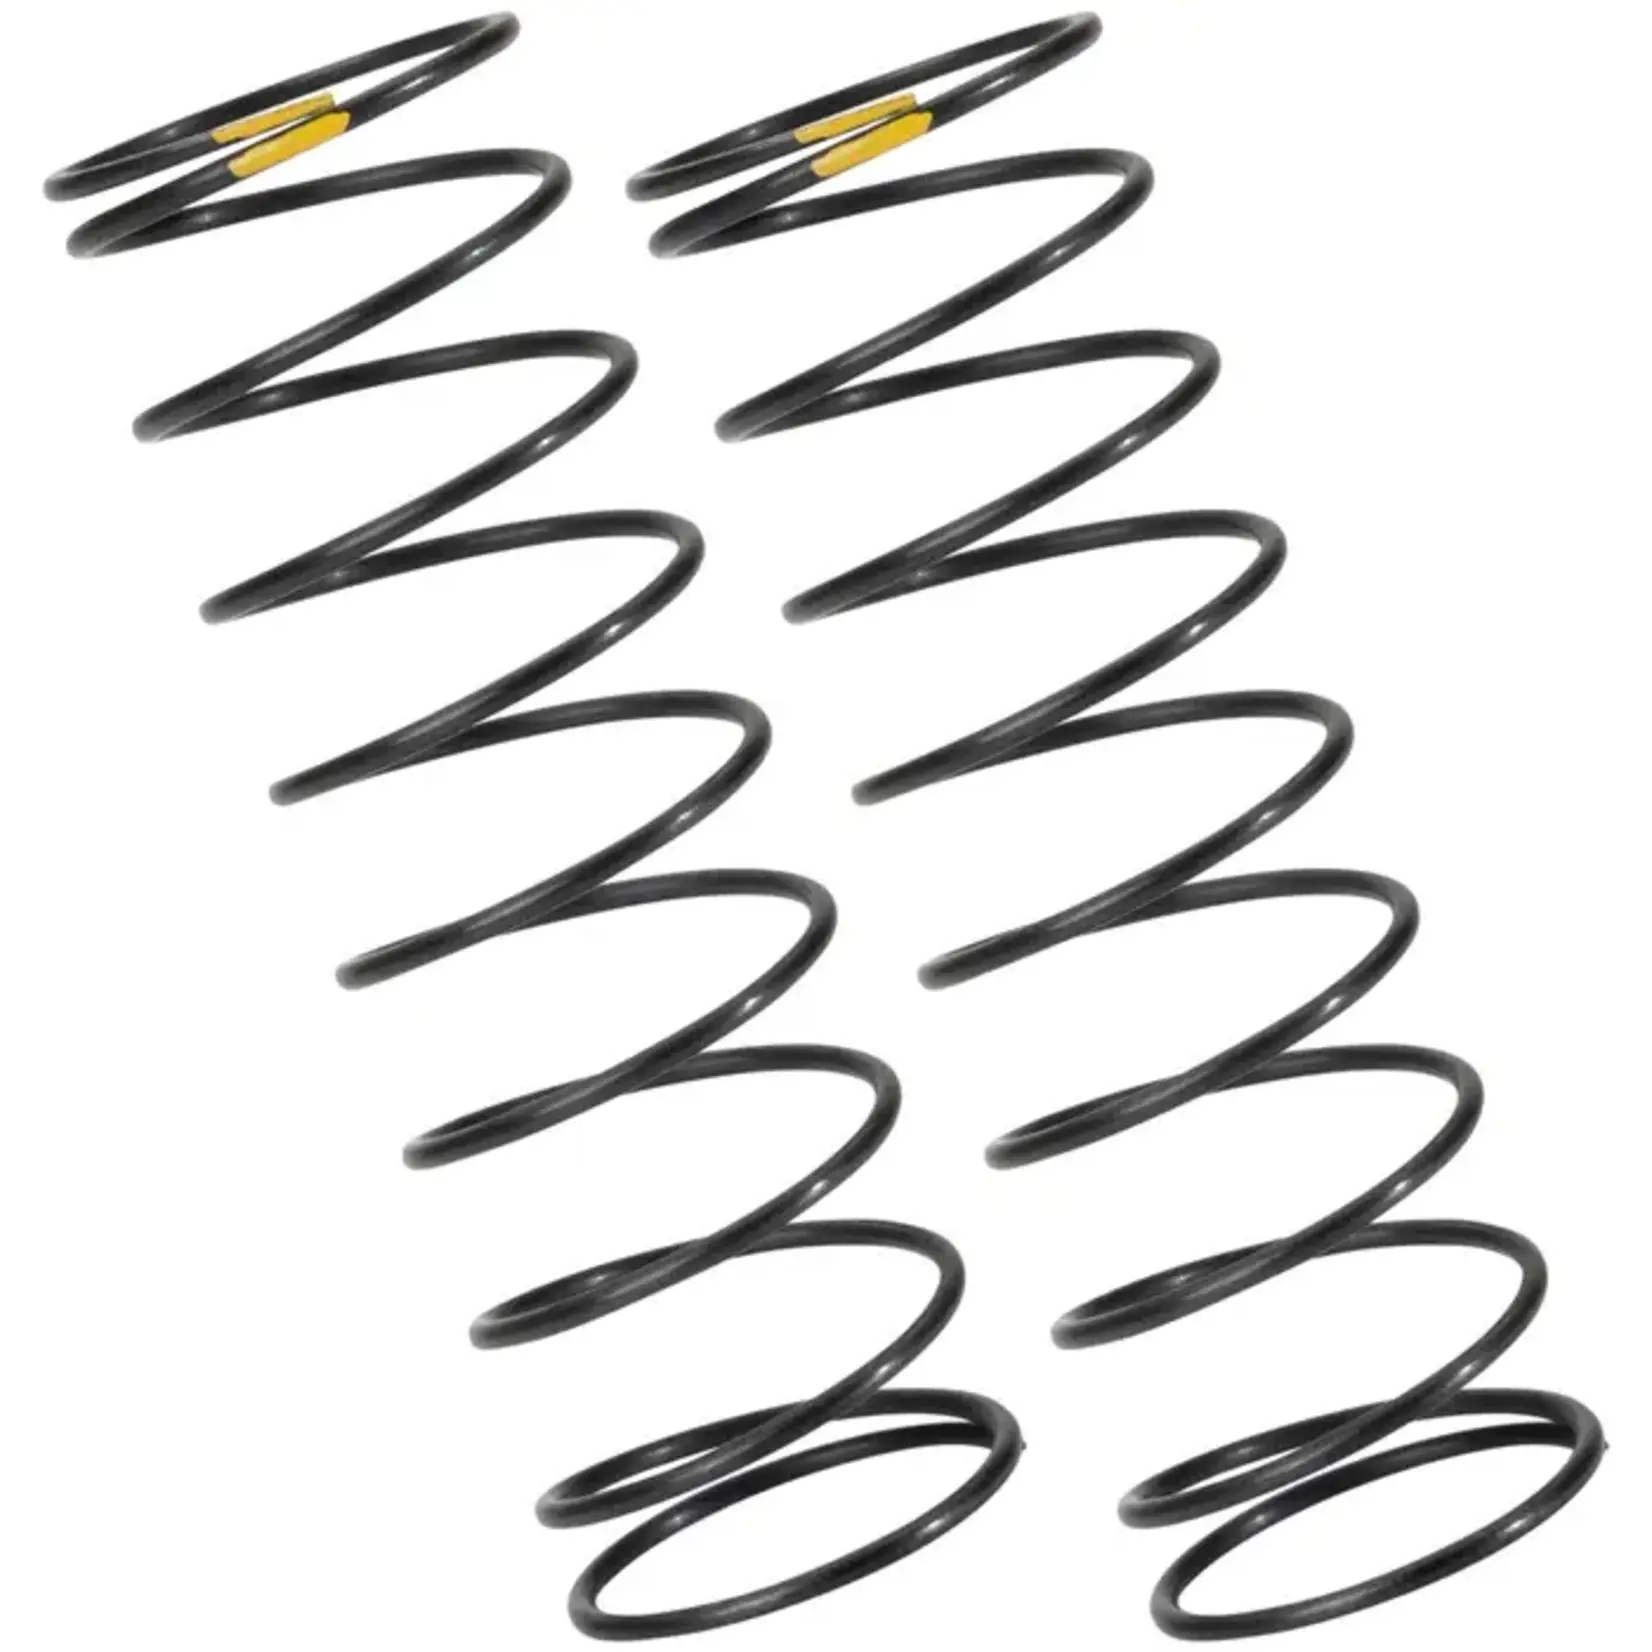 1UP 1UP10524 1Up Racing X-Gear 13mm Buggy Rear Springs - Hard 9.75T Yellow